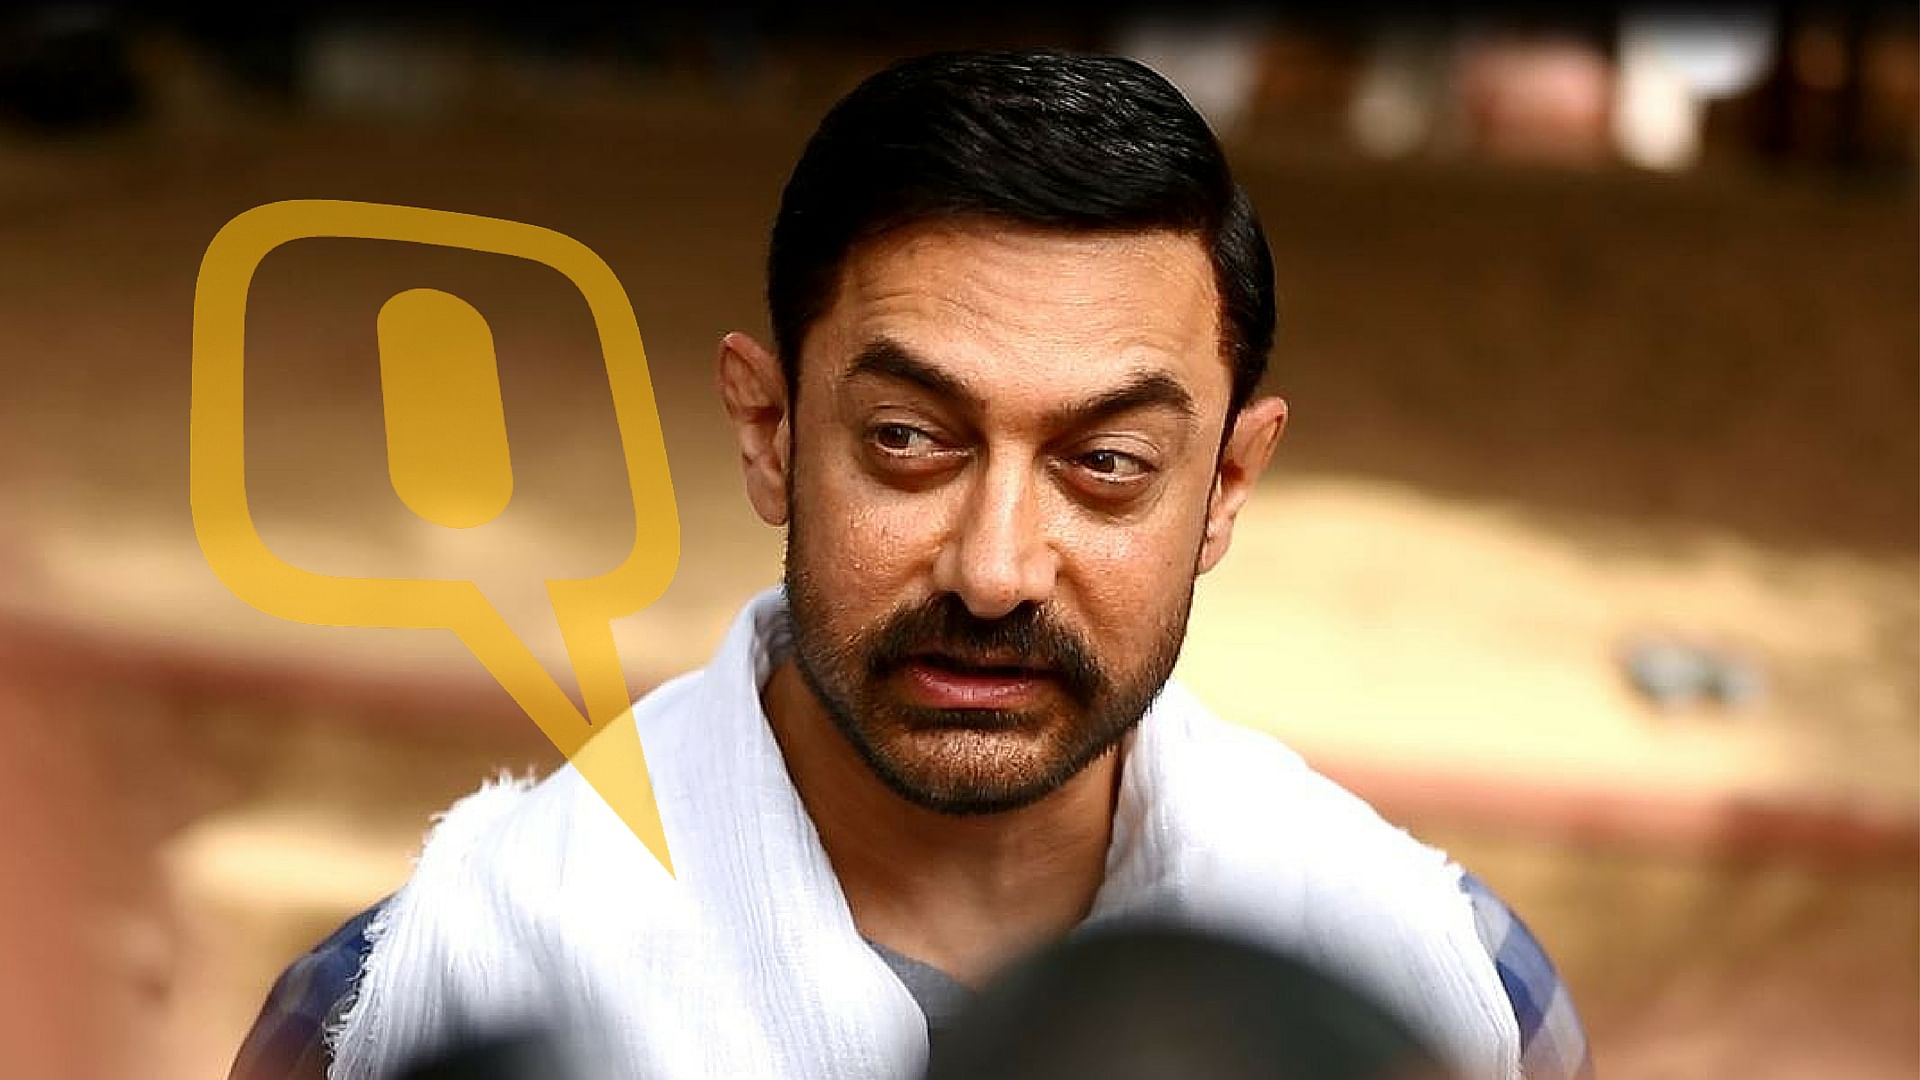 Aamir Khan on the sets of his upcoming movie, Dangal. (Photo: <b>The Quint</b>)